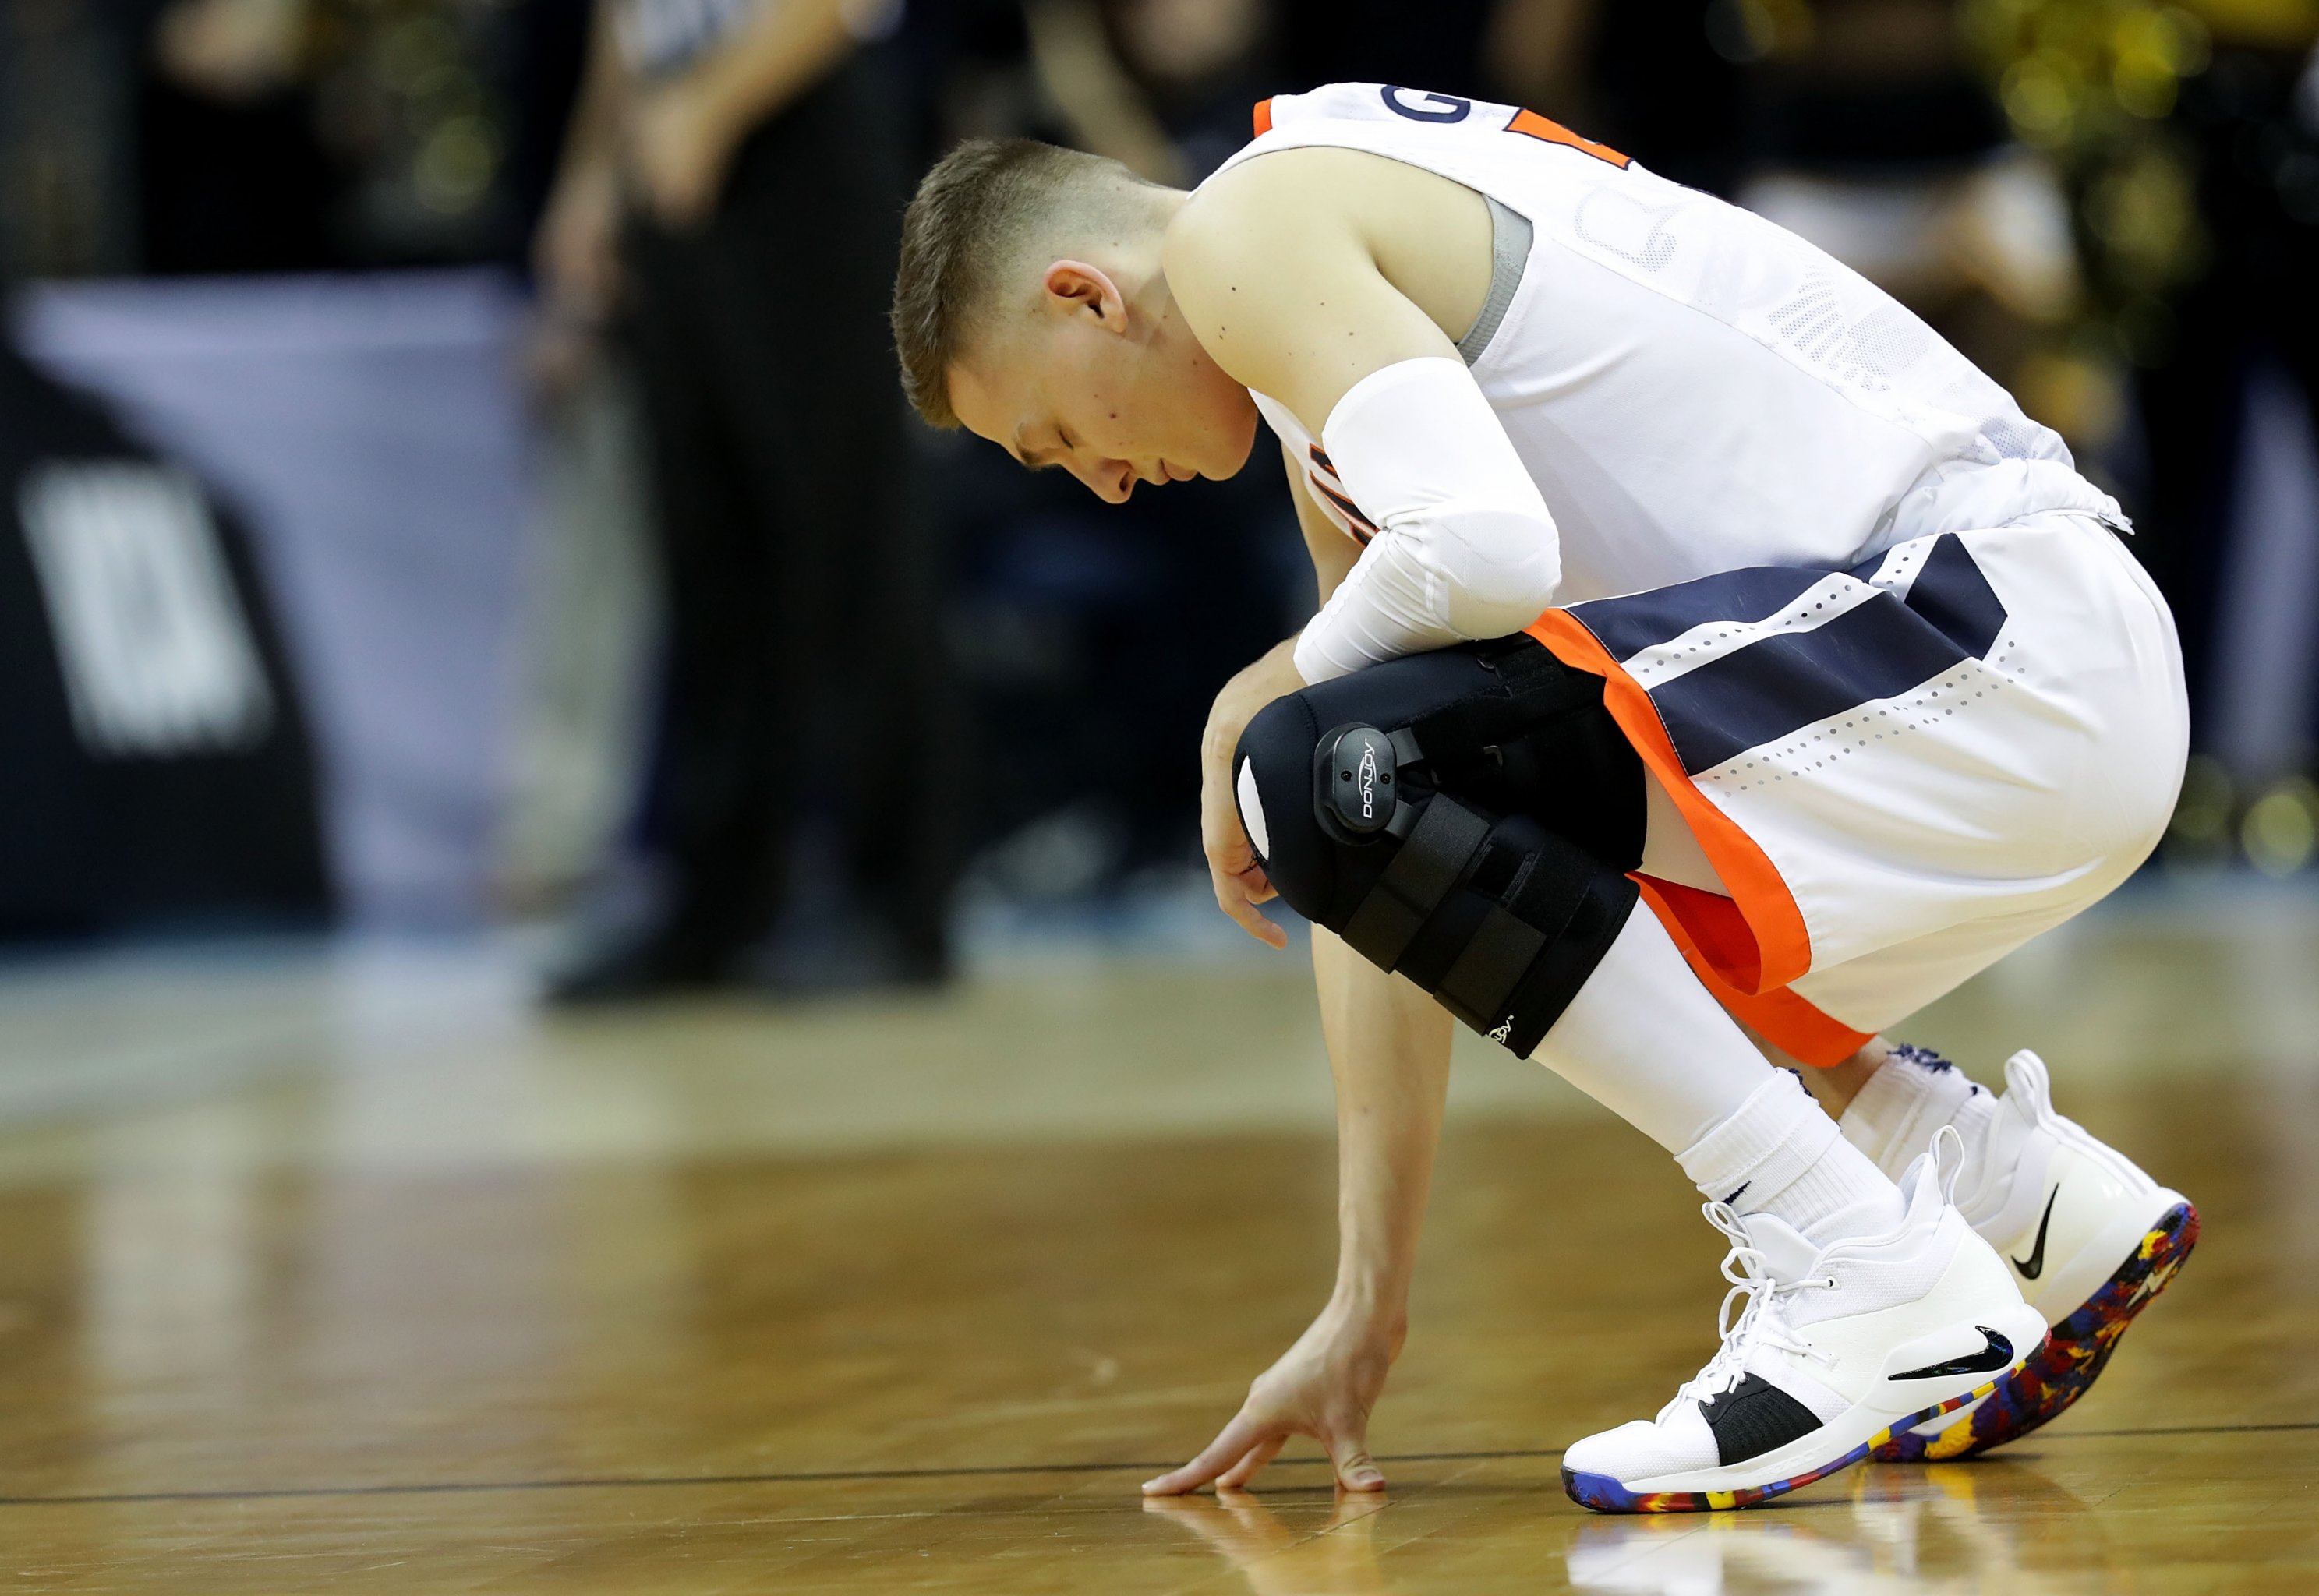 Should UVA thank Oregon star for the Cavaliers having Kyle Guy?